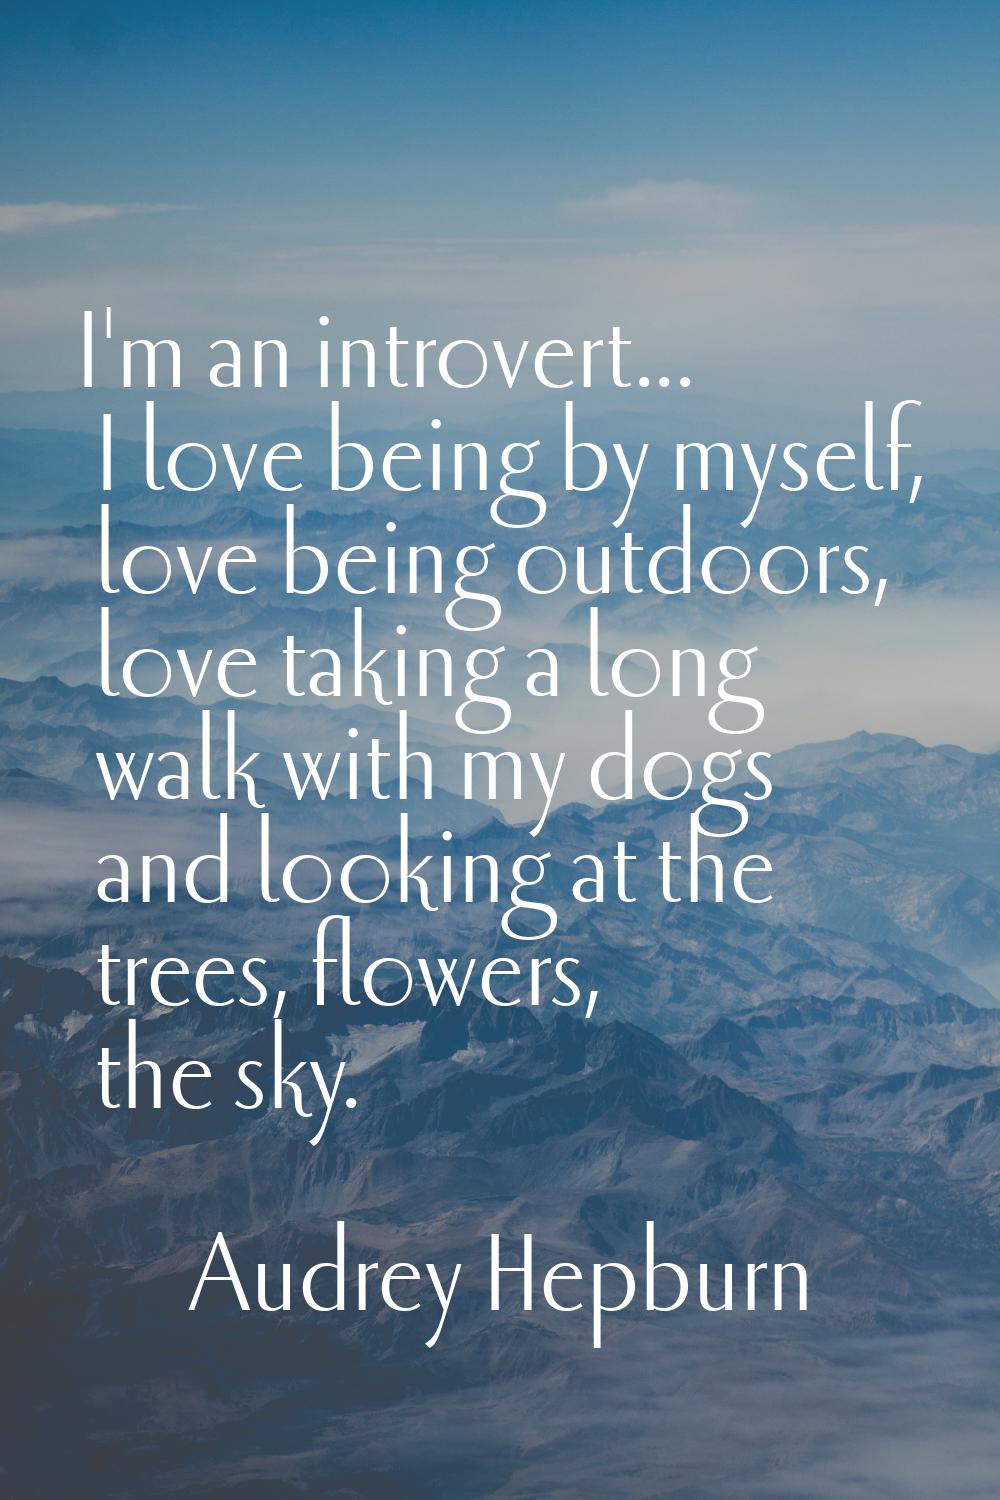 I'm an introvert... I love being by myself, love being outdoors, love taking a long walk with my do